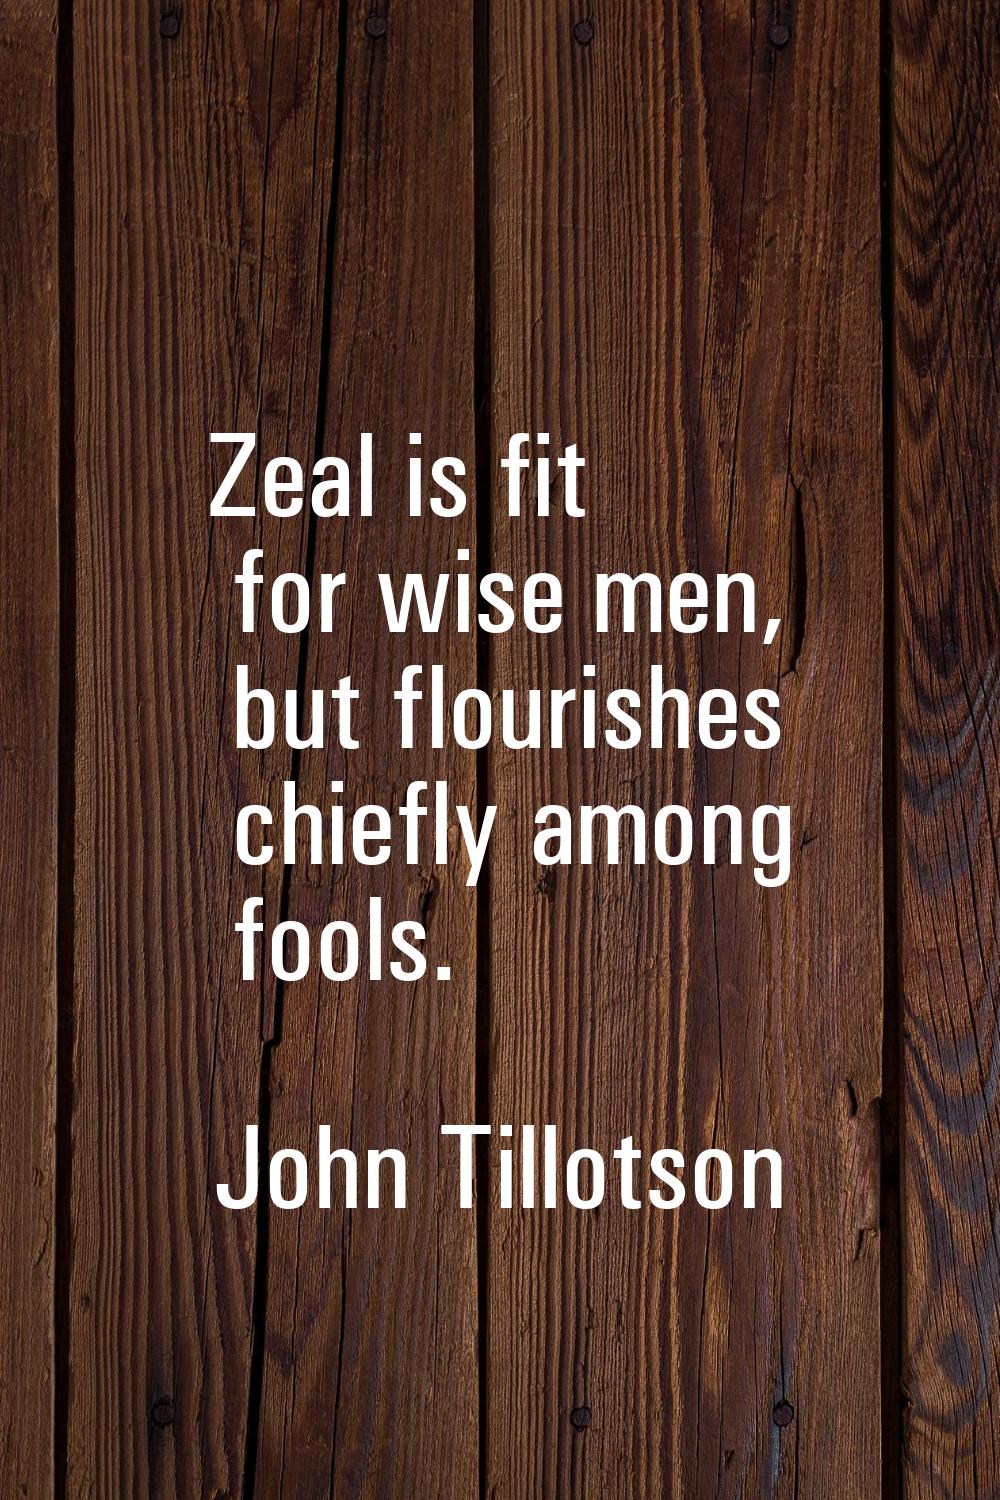 Zeal is fit for wise men, but flourishes chiefly among fools.